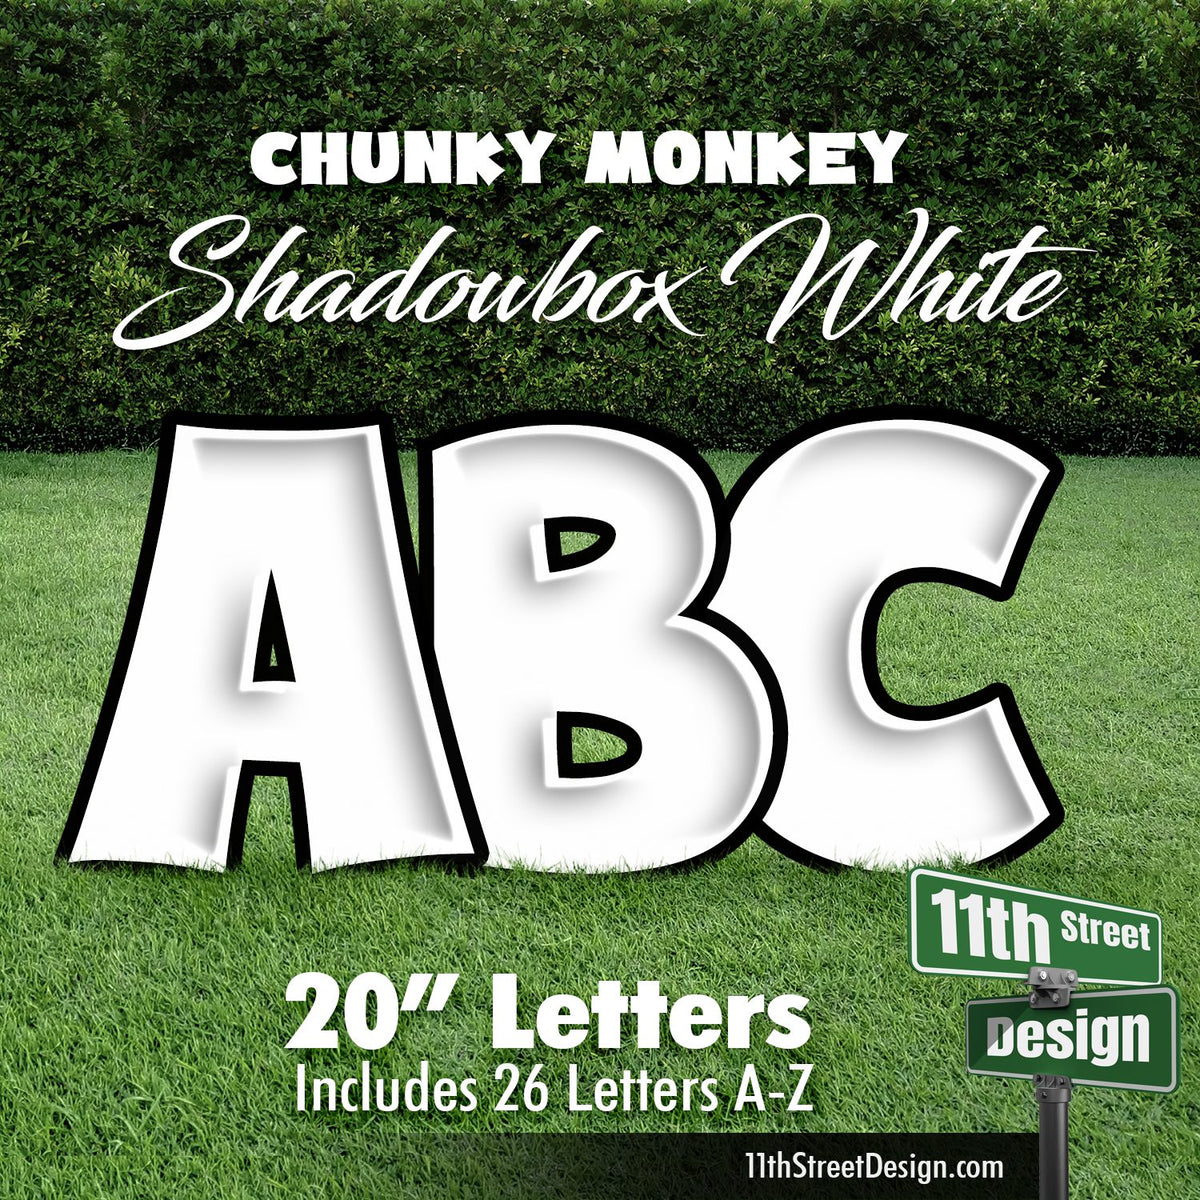 Shadowbox White 20&quot; Chunky Monkey 26 Letter Alphabet Yard Card Set Includes Letters A-Z